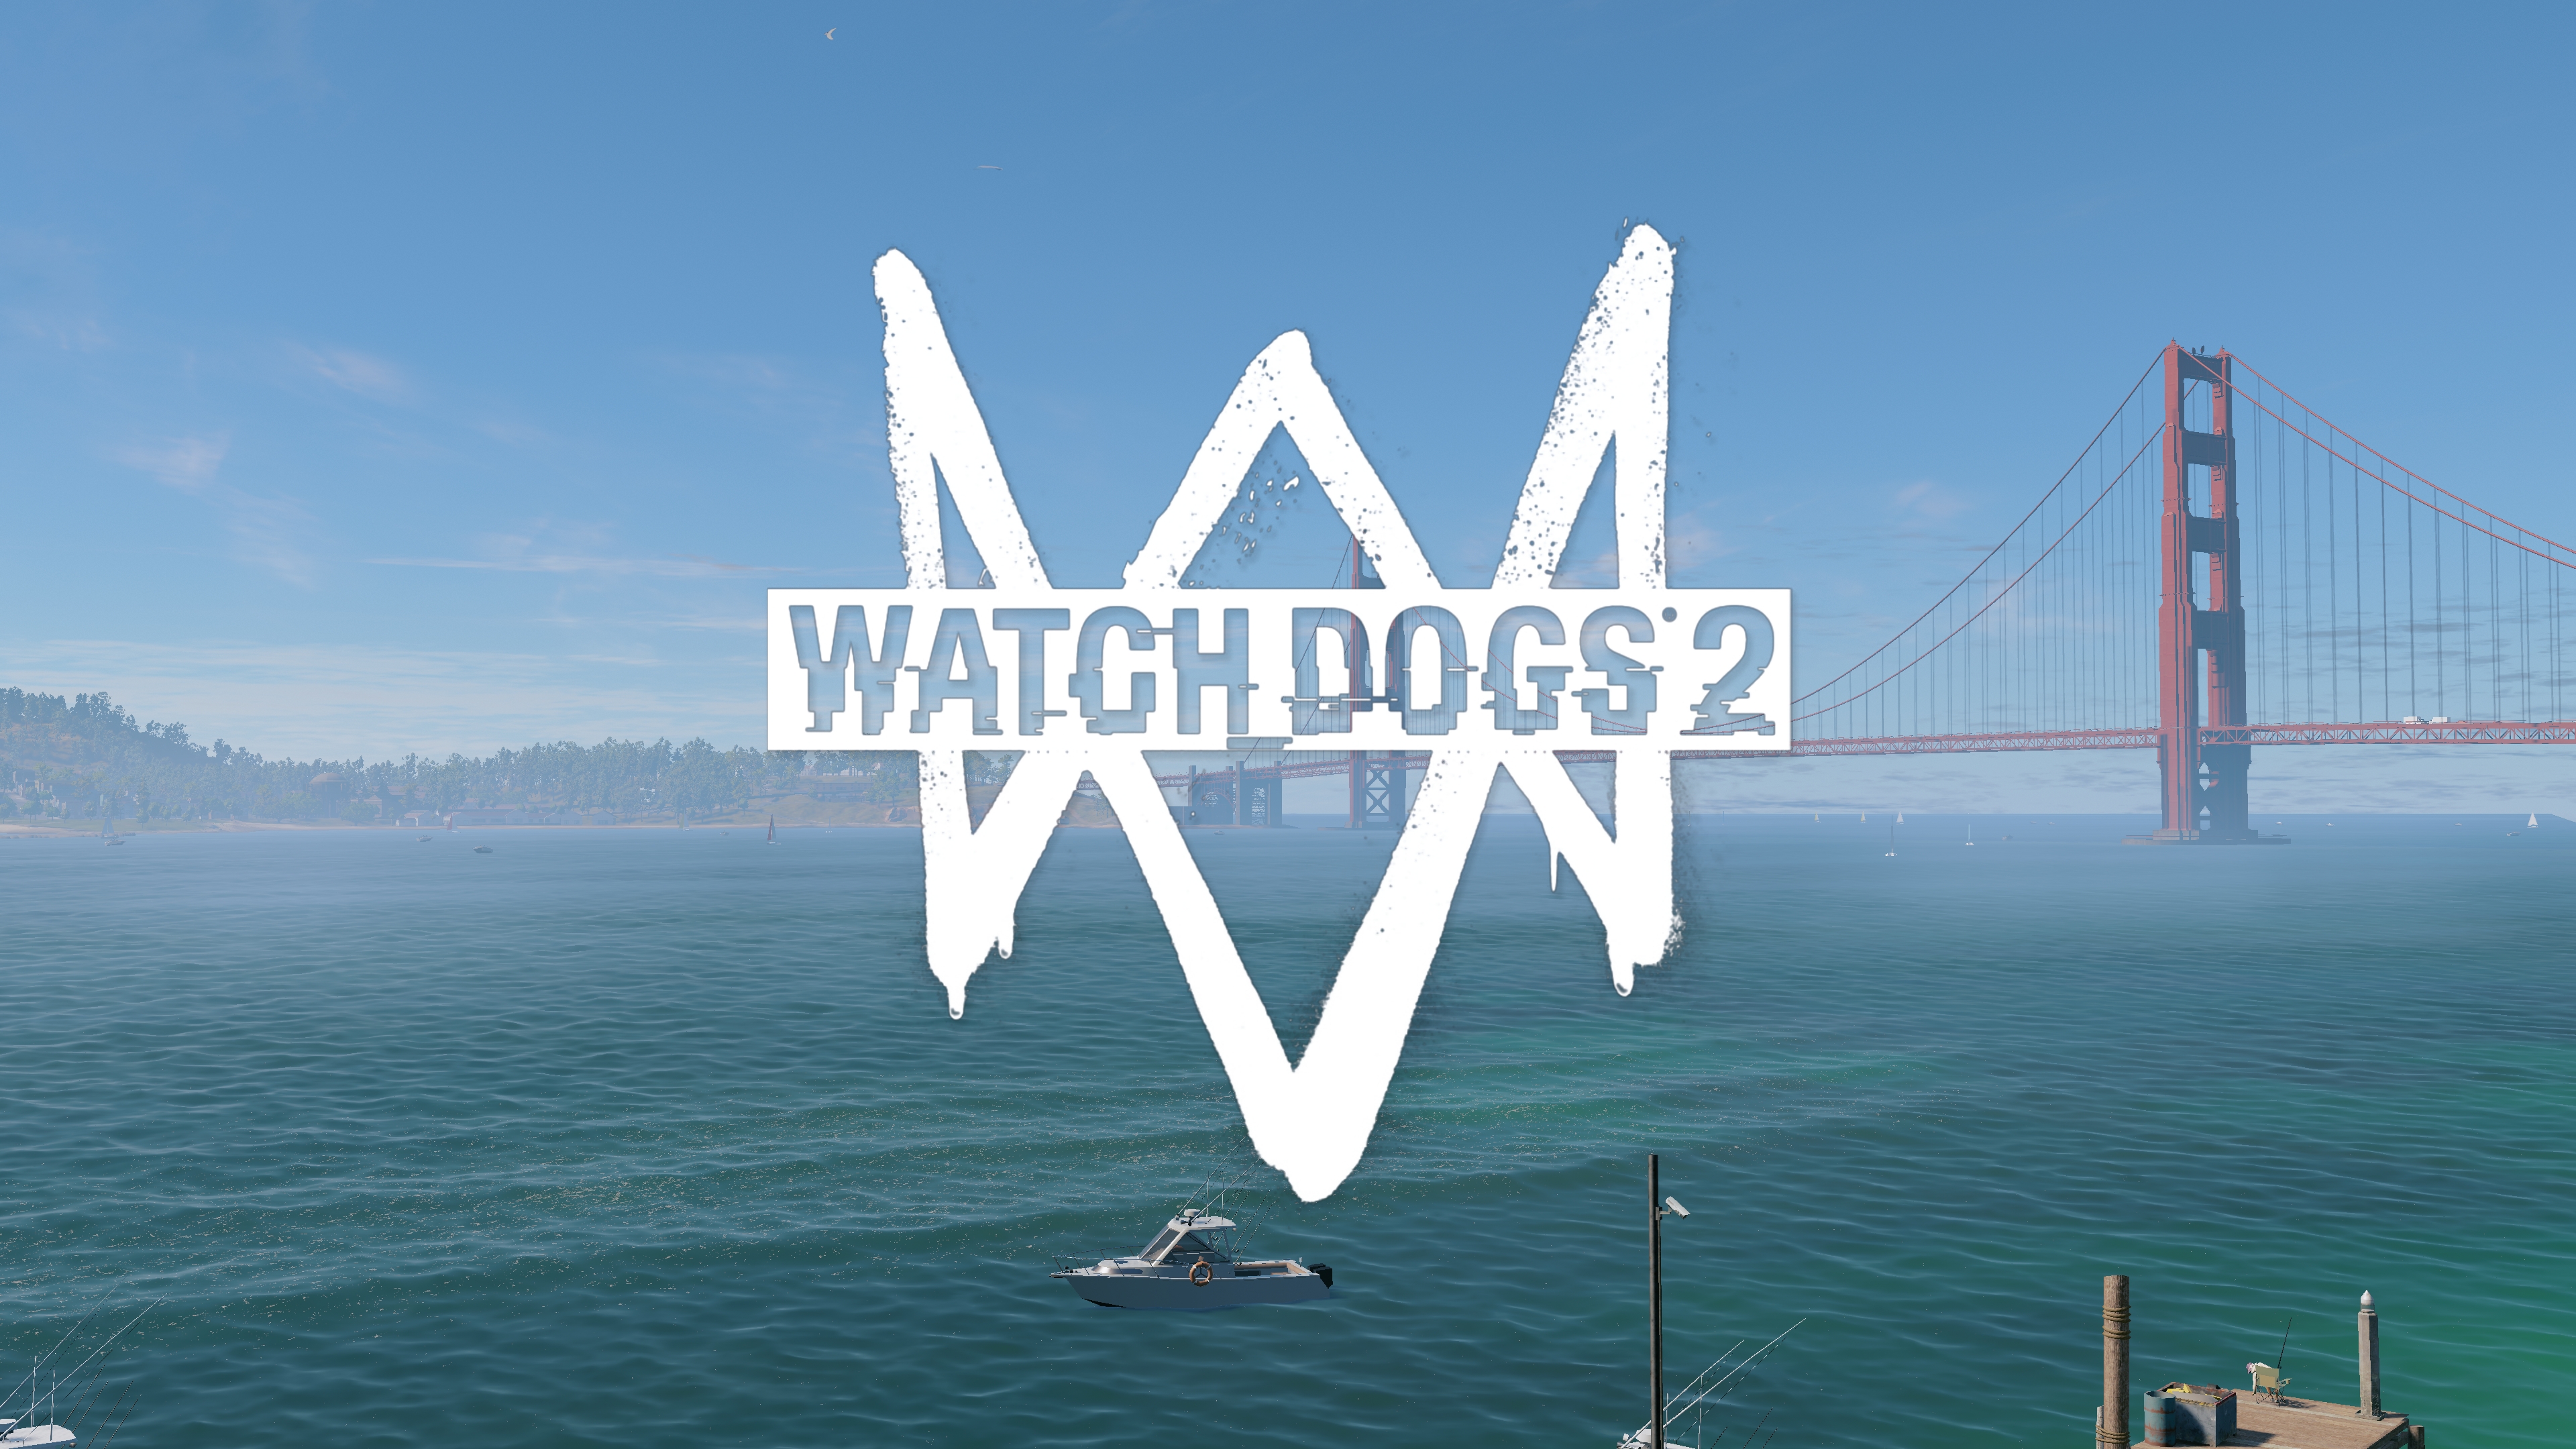  Watch Dogs 2 Tablet Wallpapers